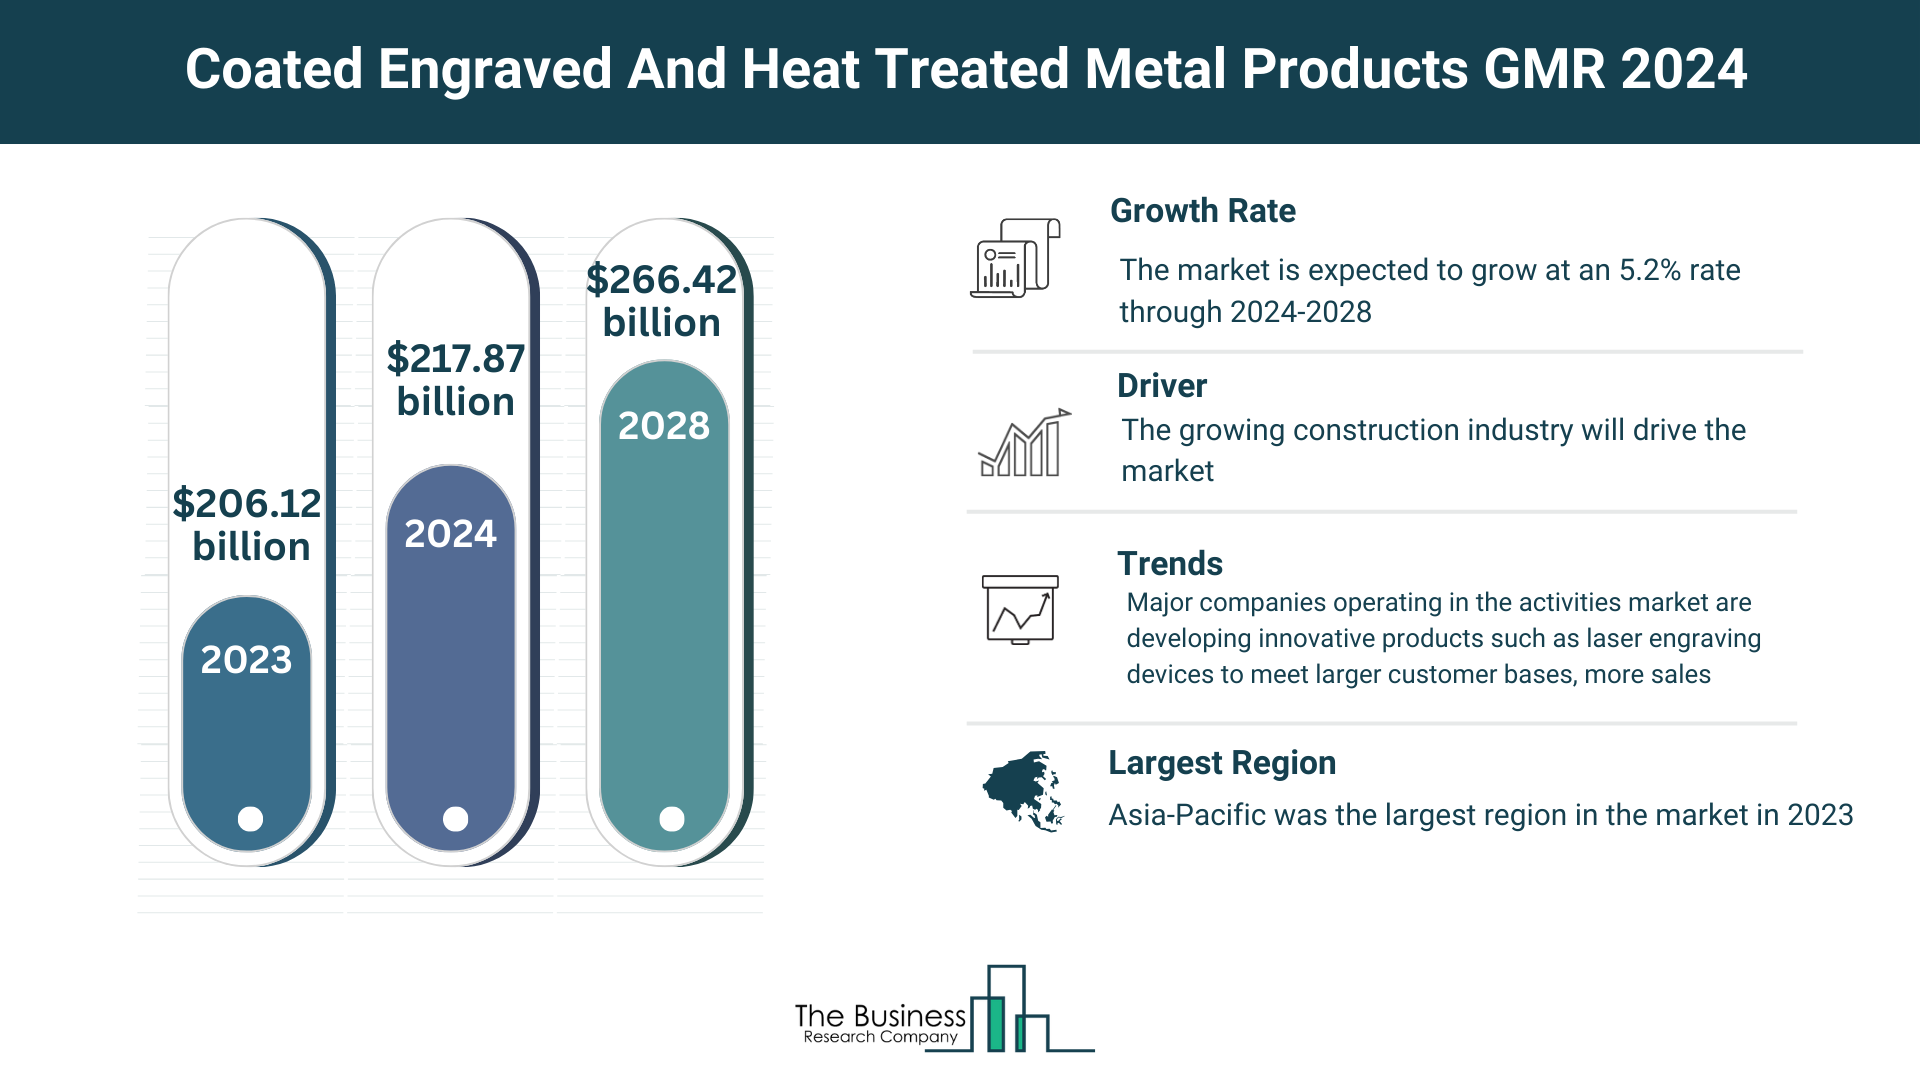 Global Coated Engraved And Heat Treated Metal Products Market